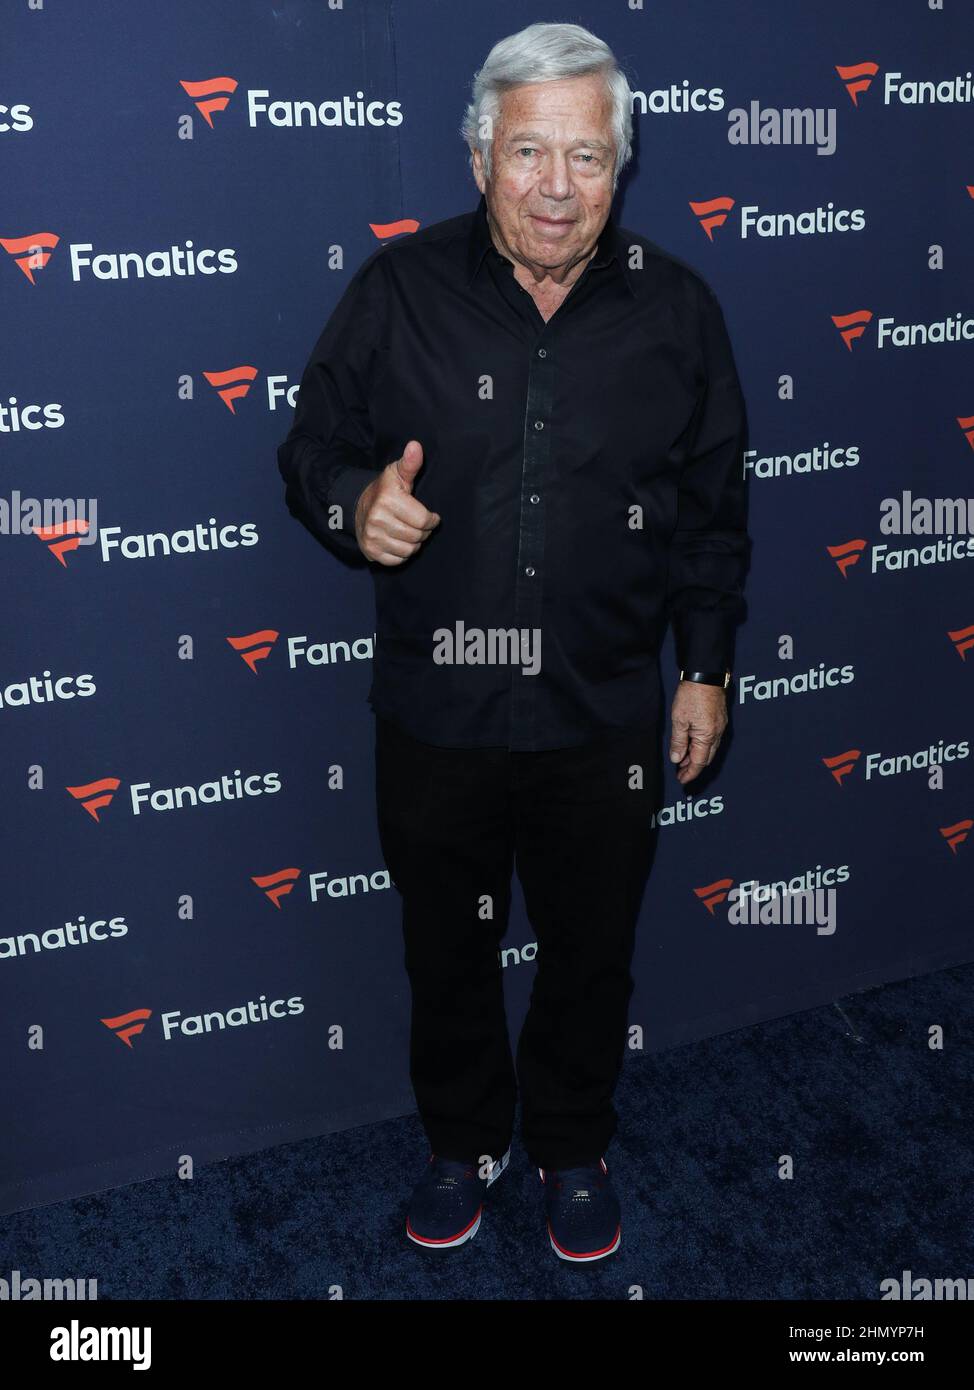 Culver City, United States. 12th Feb, 2022. American rapper Meek Mill  (Robert Rihmeek Williams) arrives at Michael Rubin's Fanatics Super Bowl  Party 2022 held at 3Labs on February 12, 2022 in Culver